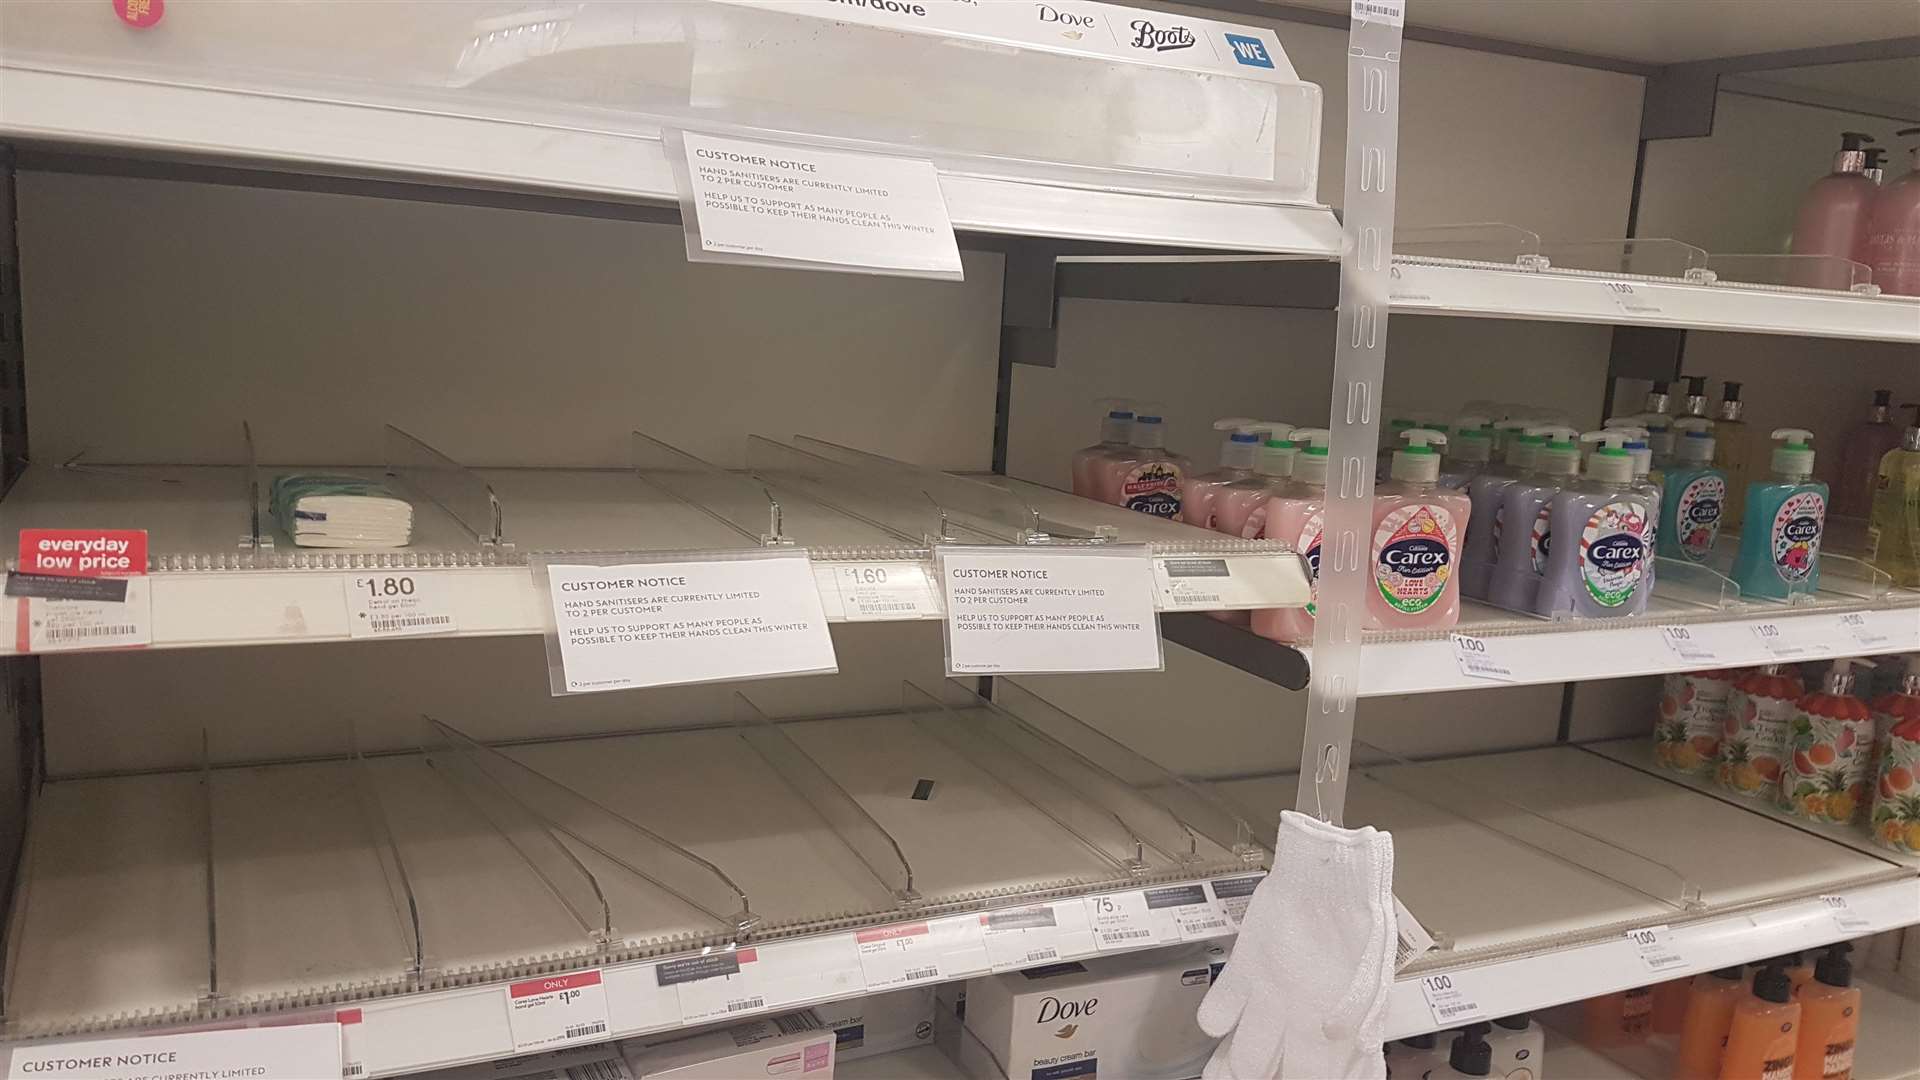 Reports emerge of empty shelves in stores across the county as people race to buy hand sanitiser. Many stores start to limit the number of bottles that can be bought by individual customers. Pictured is the display at Boots in Maidstone.